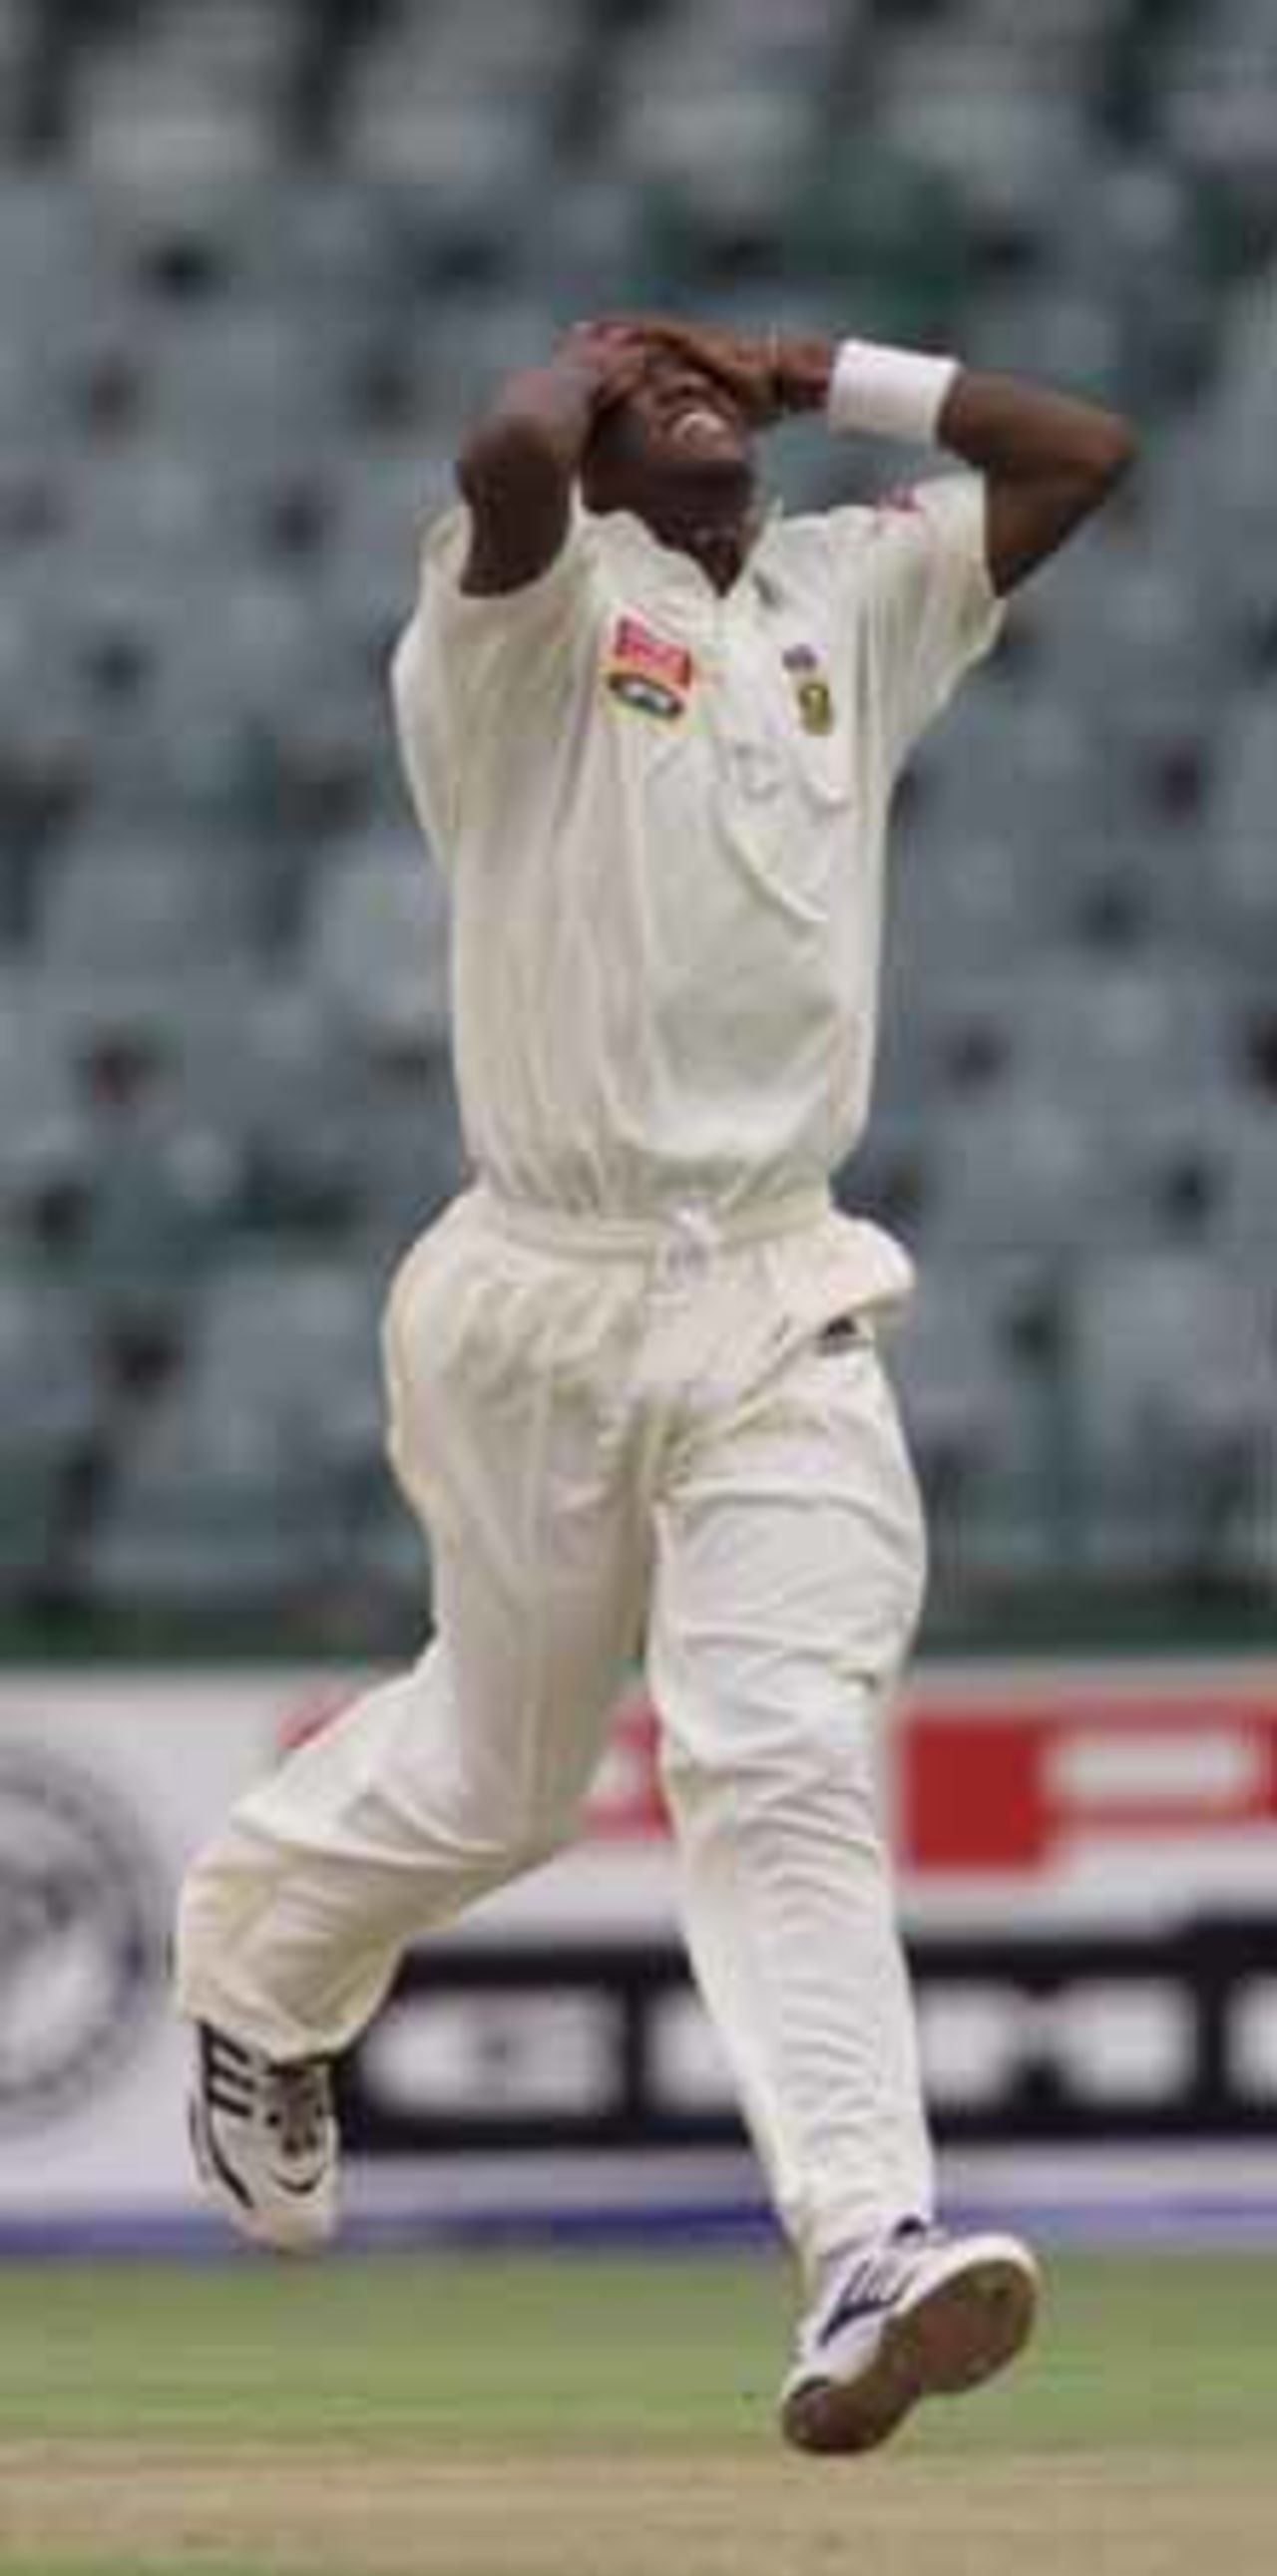 South Africa v New Zealand, 2000/01 3rd Test at the New Wanderers Stadium J'burg, 9th December